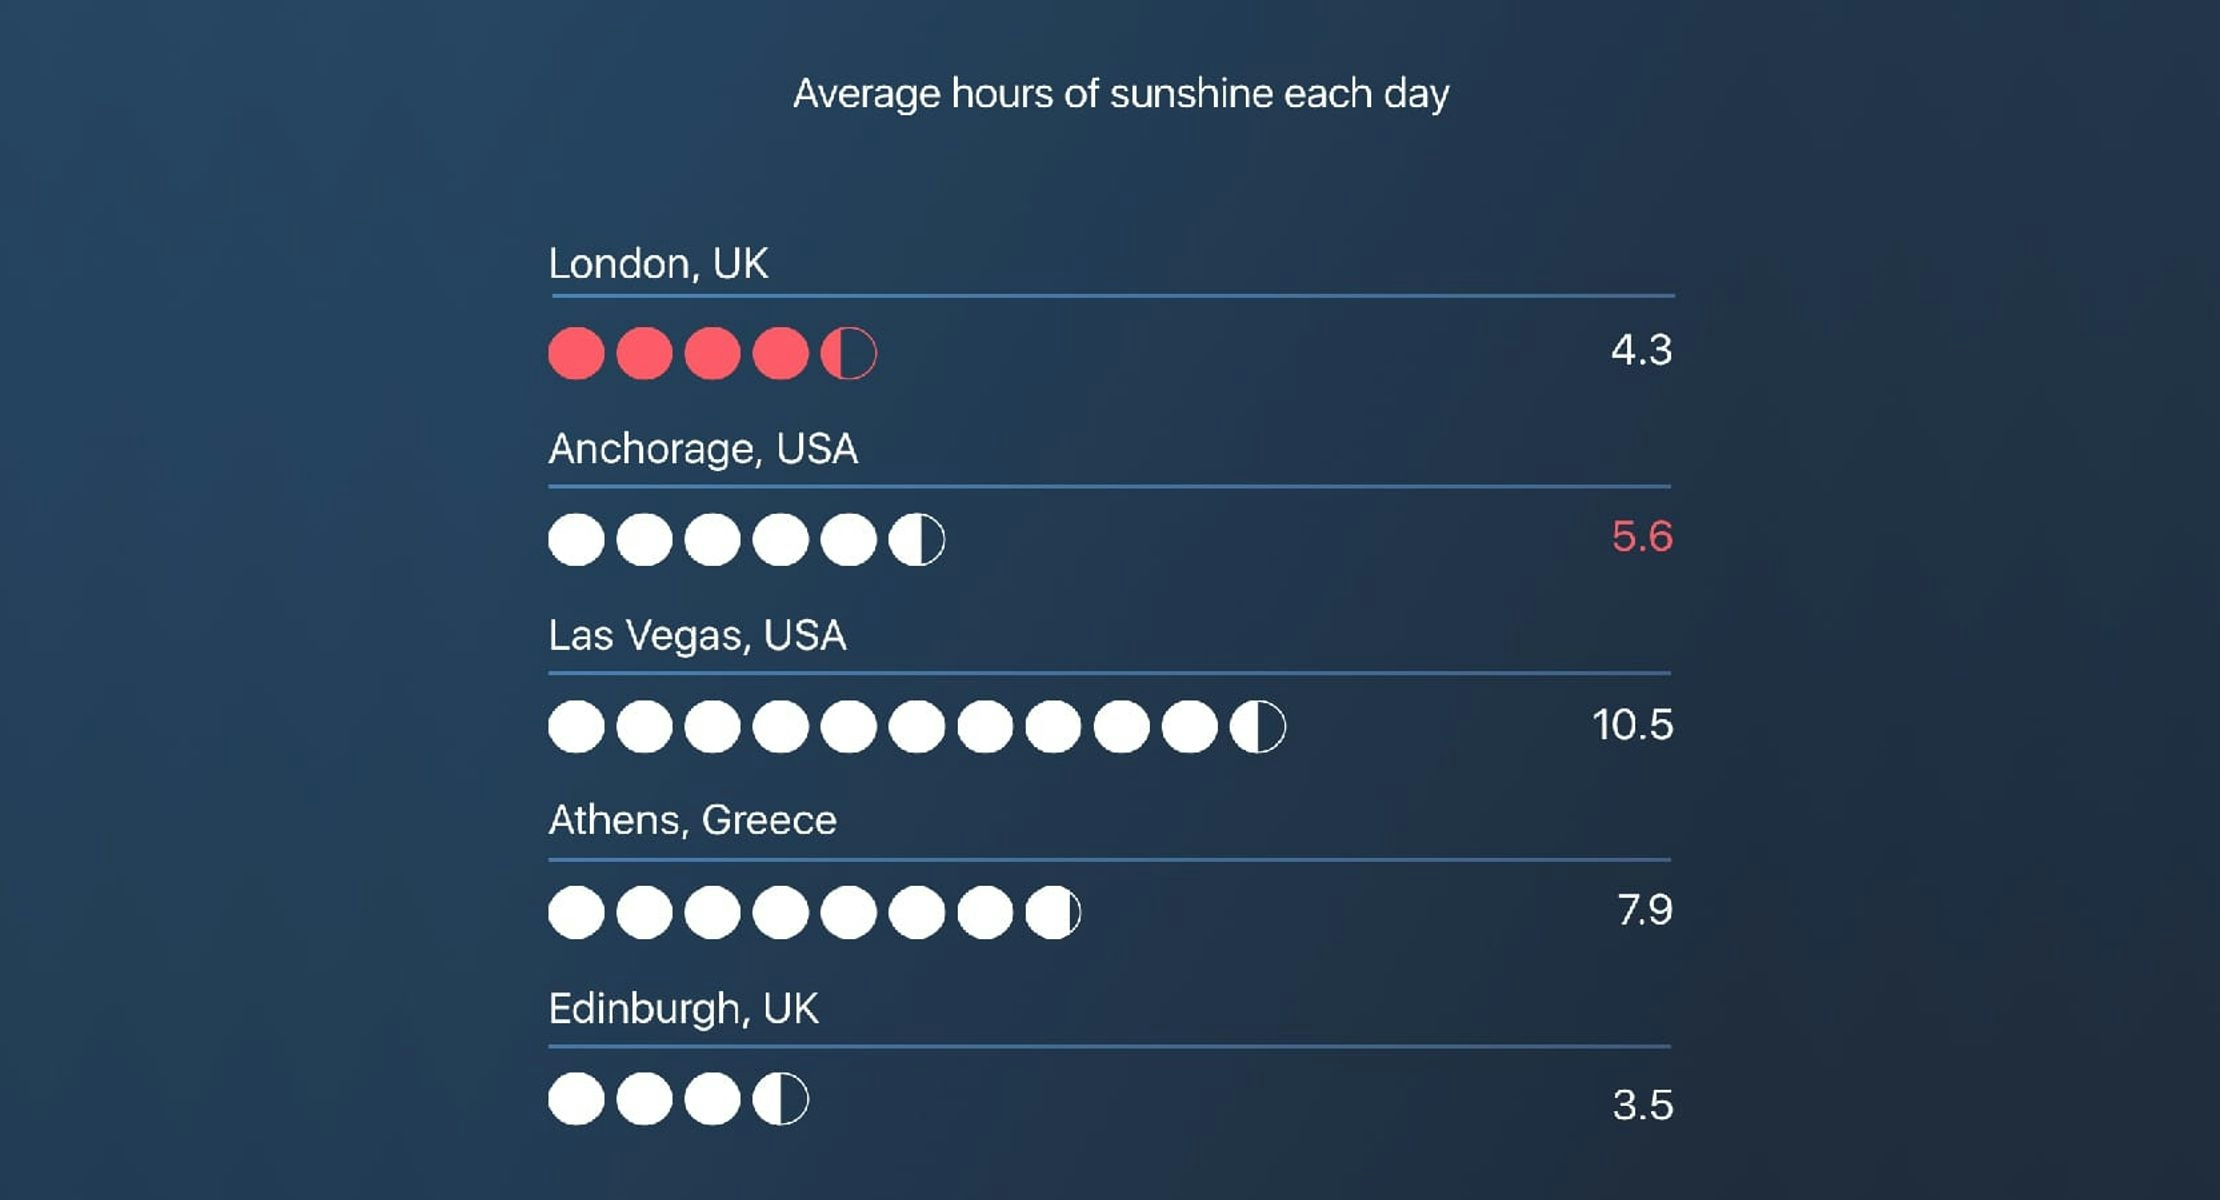 An answer from the Great British Quizulization that shows average hours of sunshine each day. It shows Edinburgh, UK has the lowest at 3.5. The highest is Las Vegas, USA with 10.5 hours per day on average.